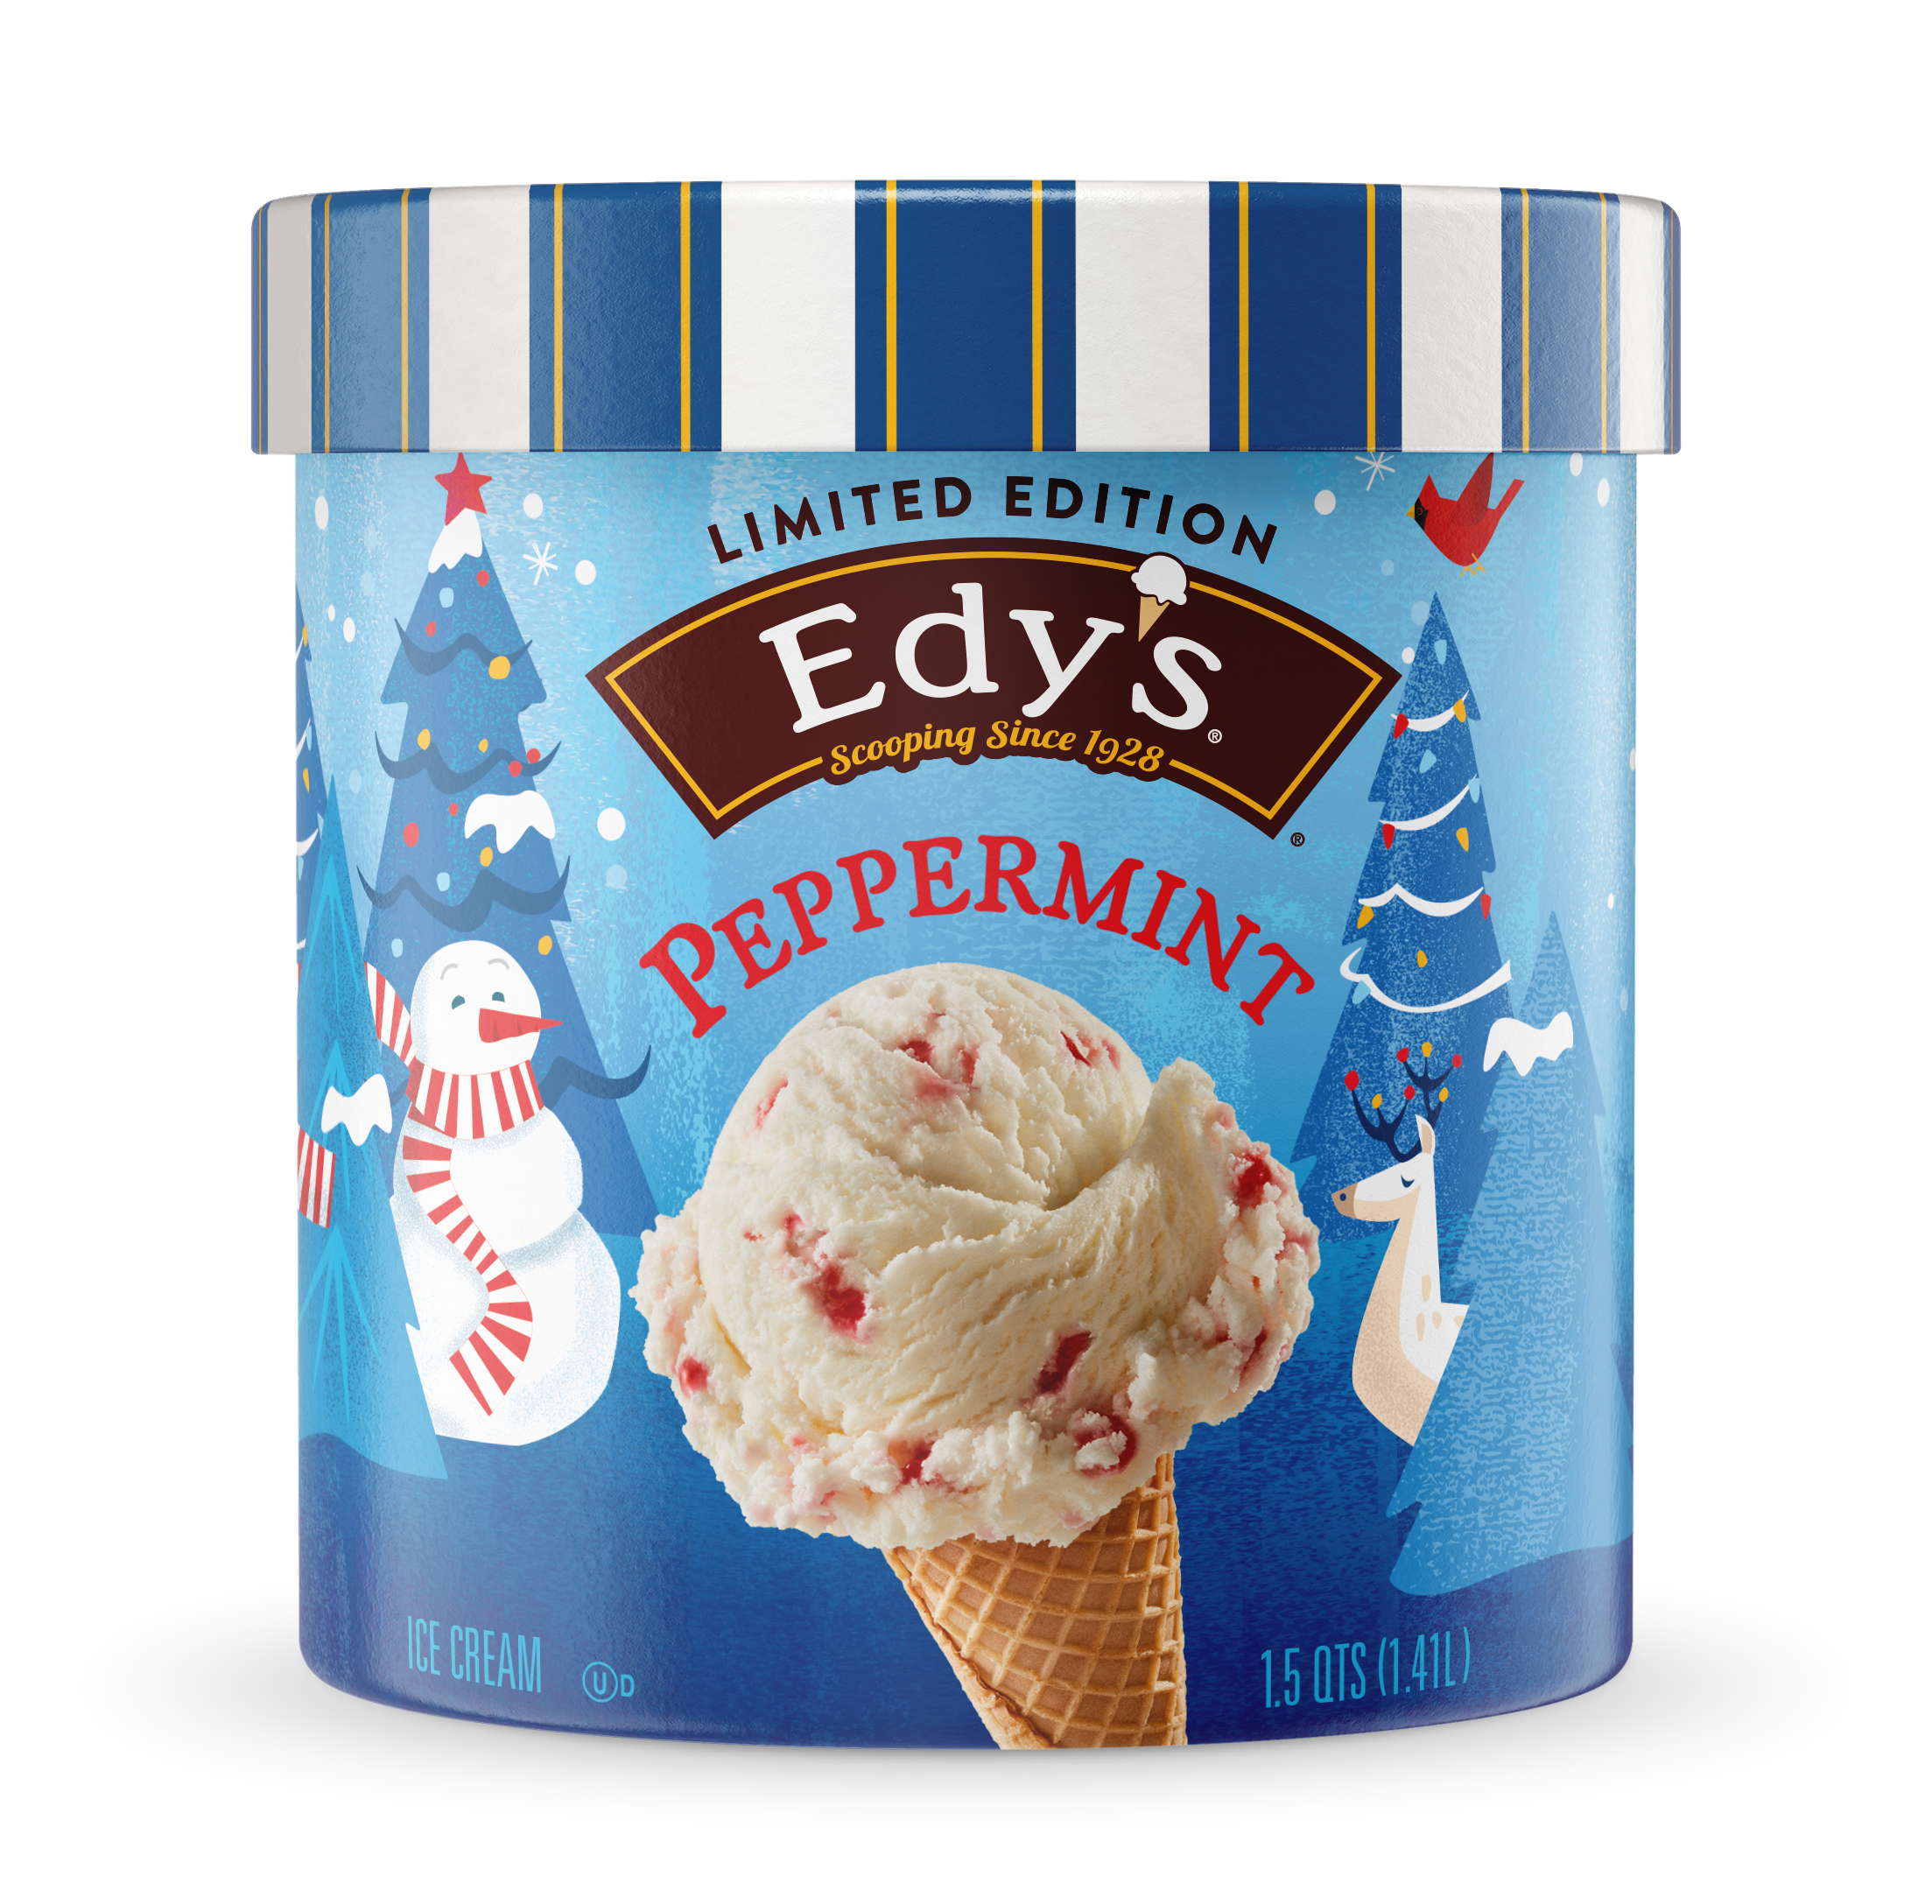 Carton of Edy's limited edition Peppermint ice cream